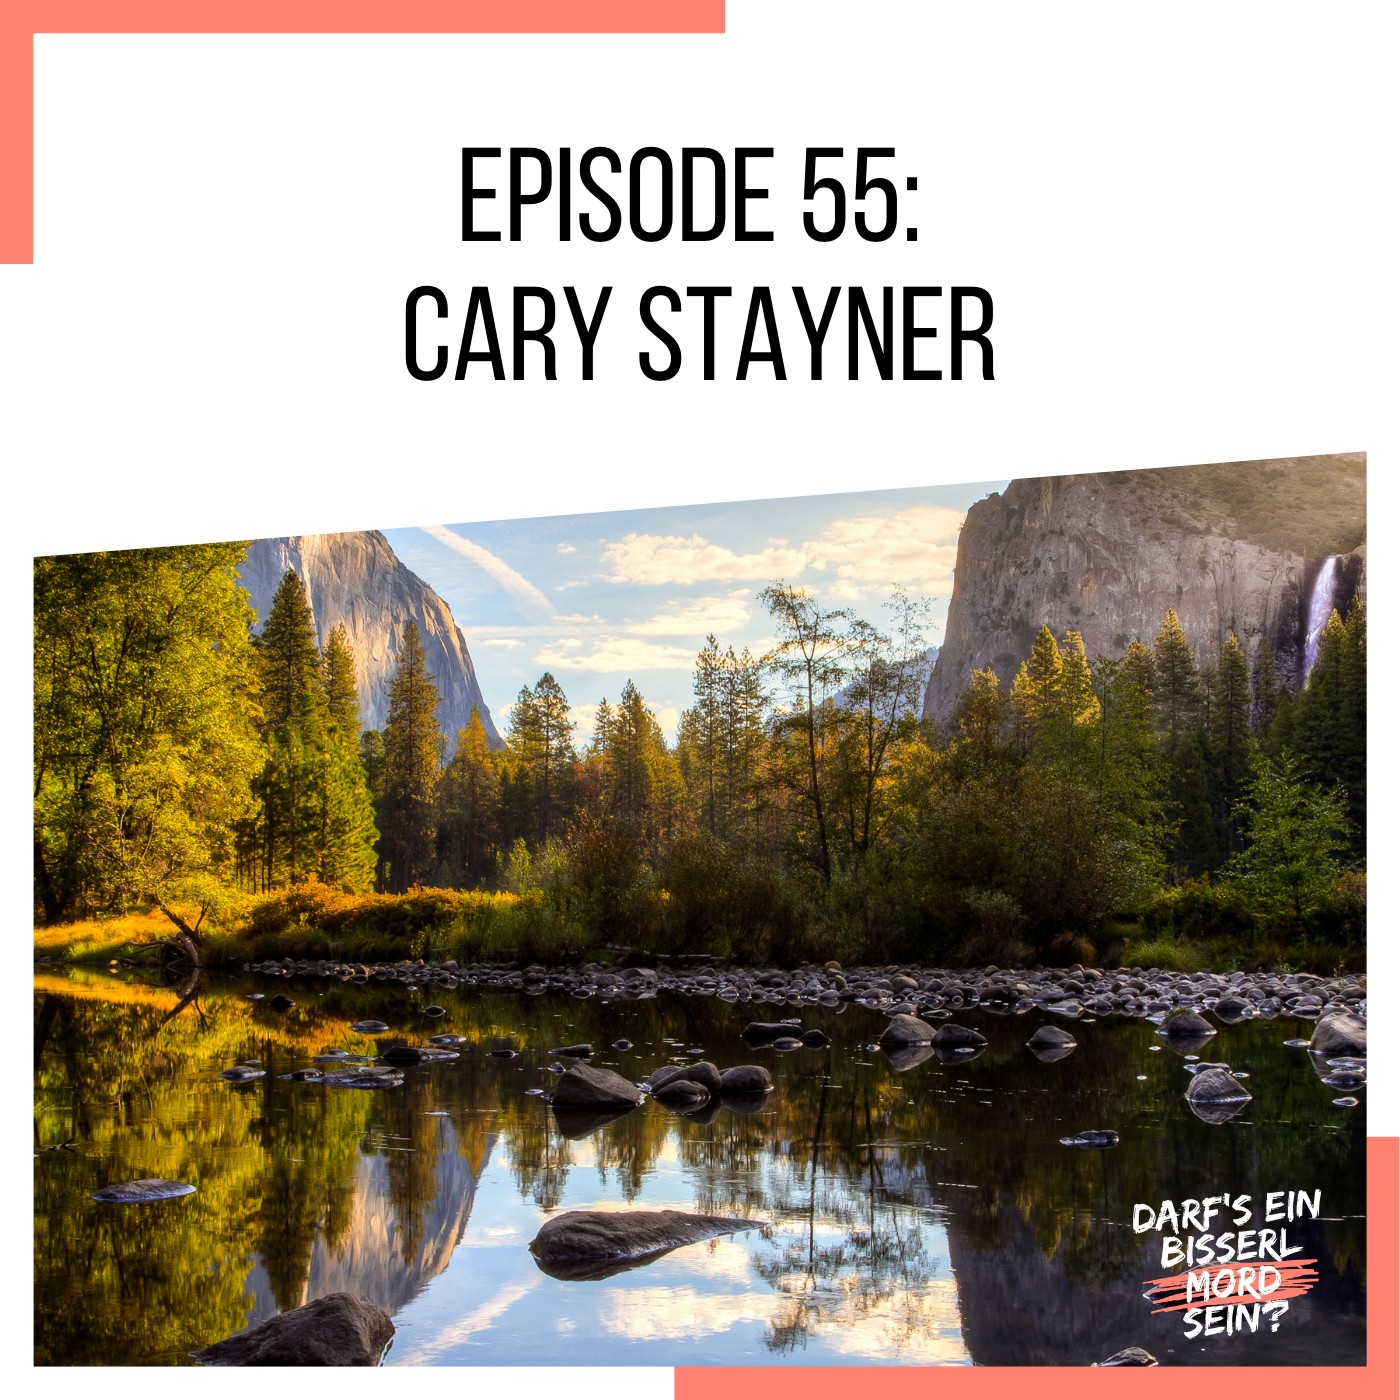 Episode 55: Cary Stayner